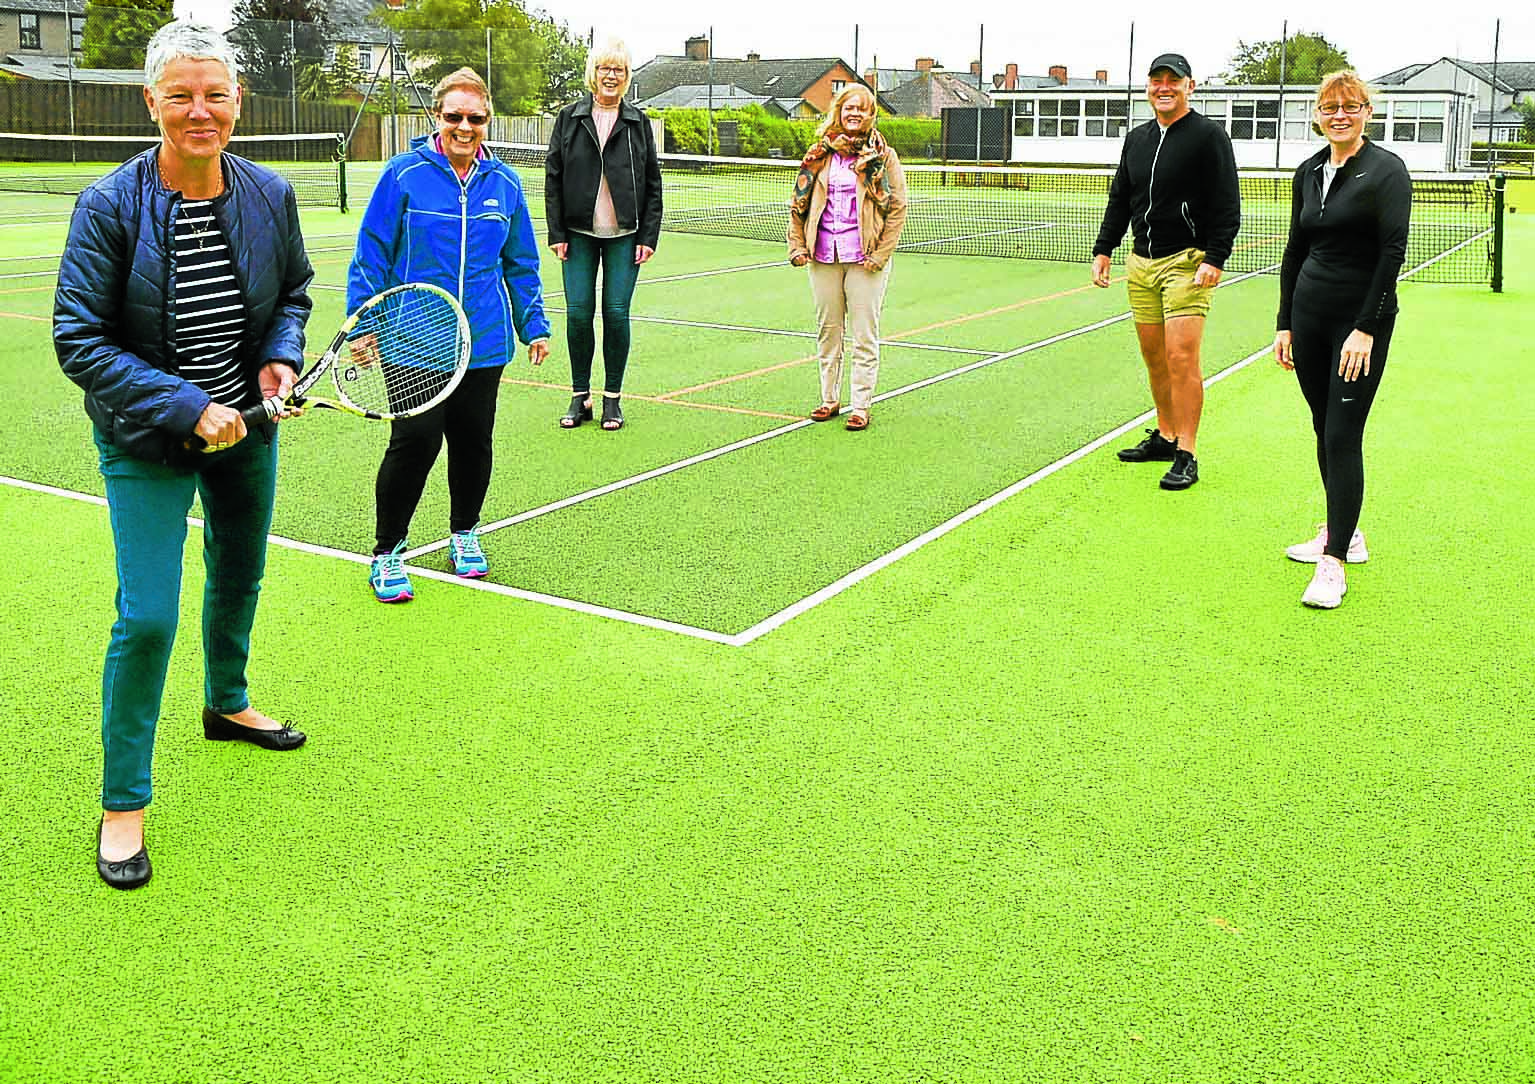 New look tennis courts are 'ace'